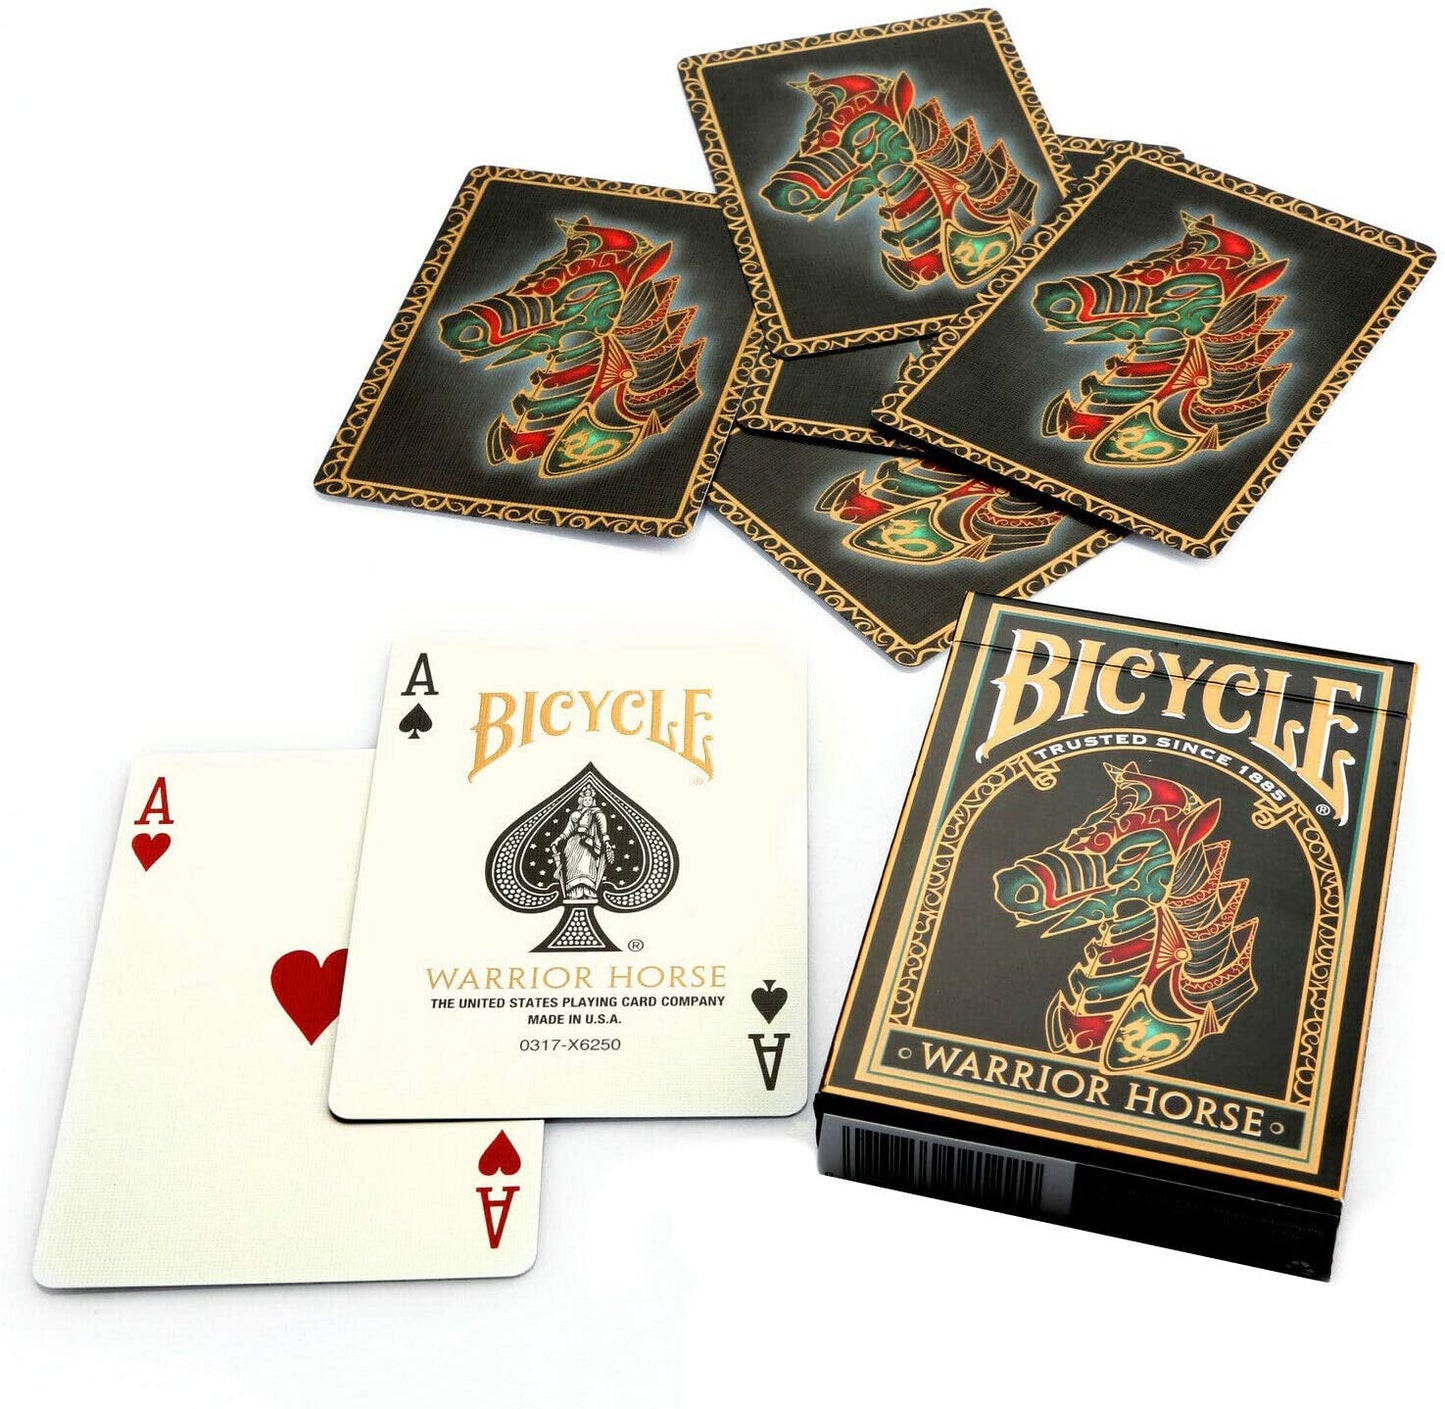 Bicycle® Cards - Warrior Horse Edition